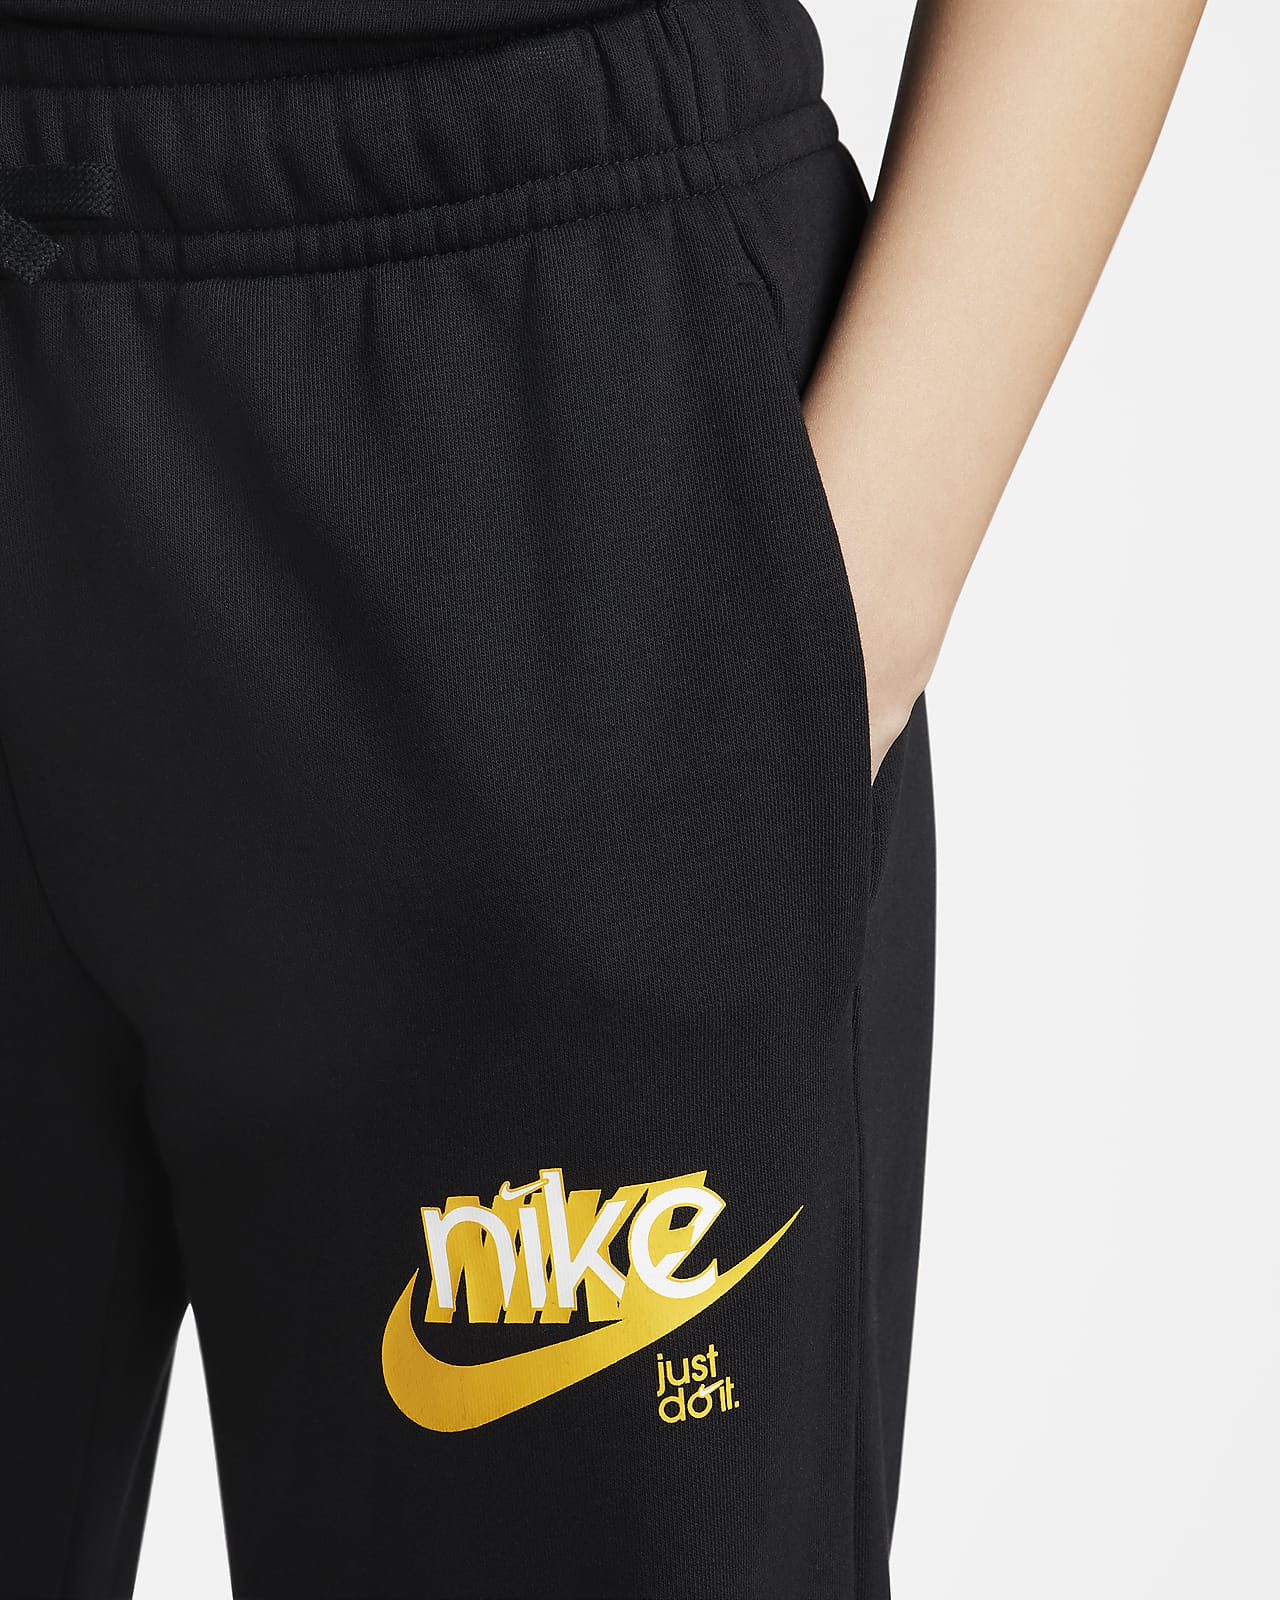 Nike Sportswear Essential Women's French Terry Shorts (X-Small